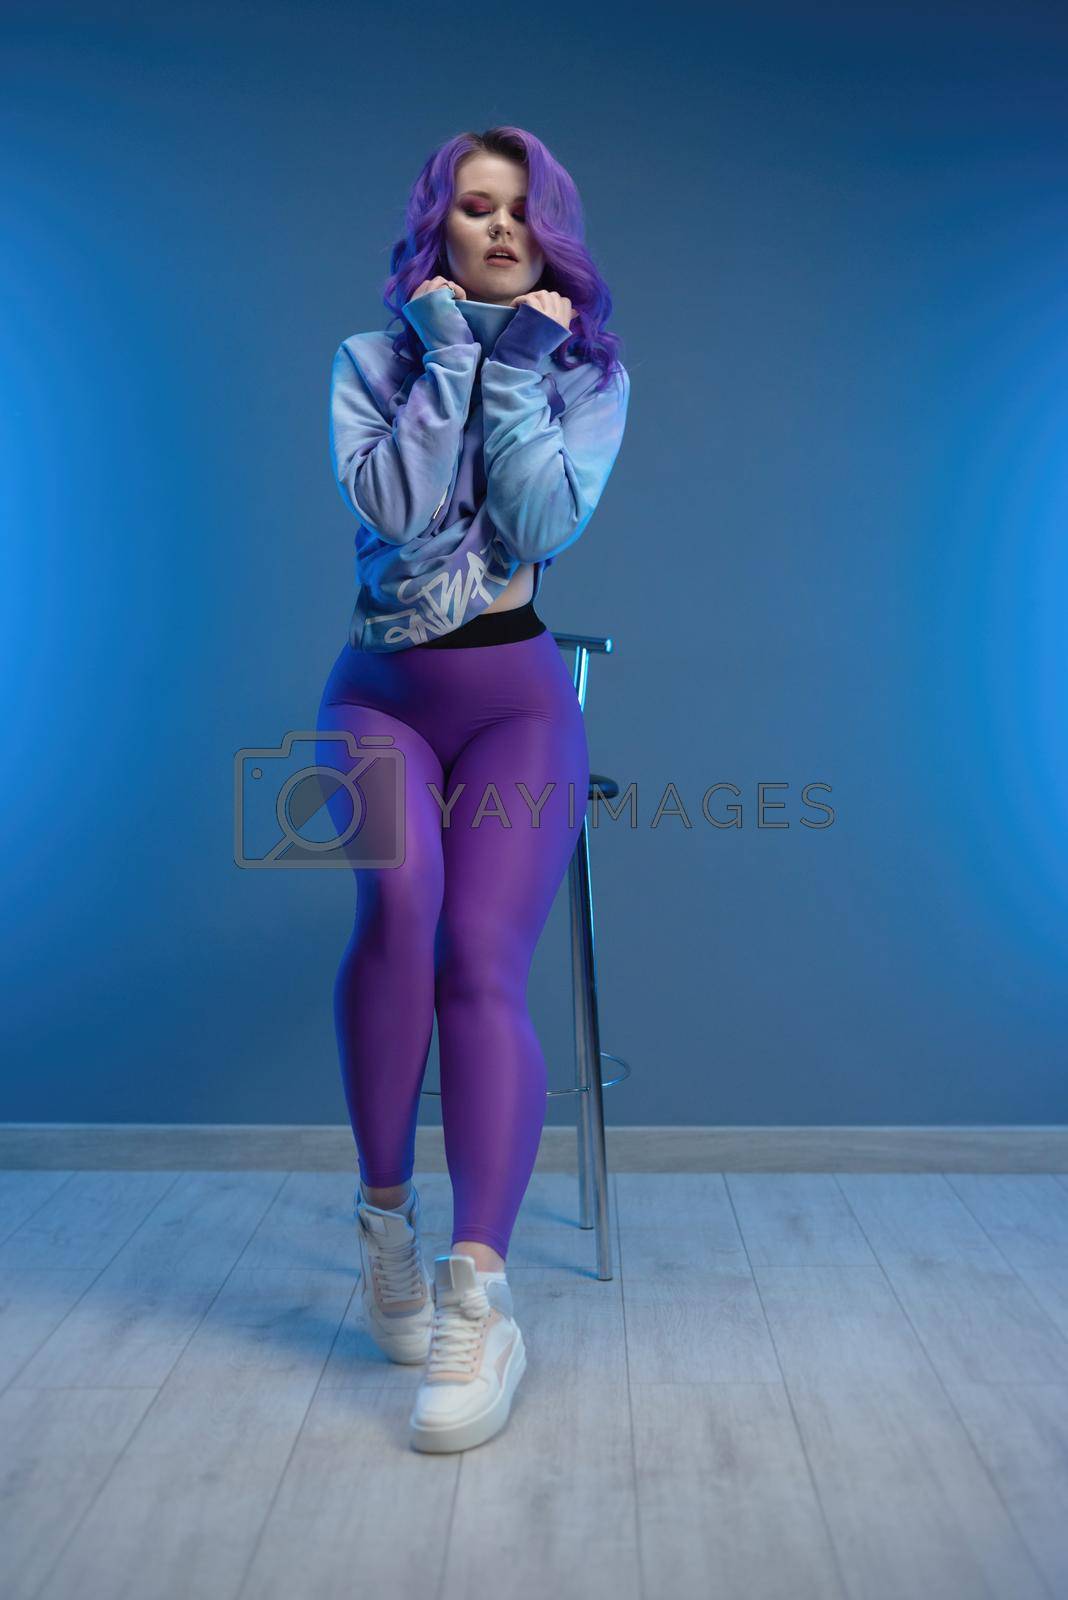 Royalty free image of a girl in stylish purple sportswear and with purple hair poses sexually on a bar stool by Rotozey